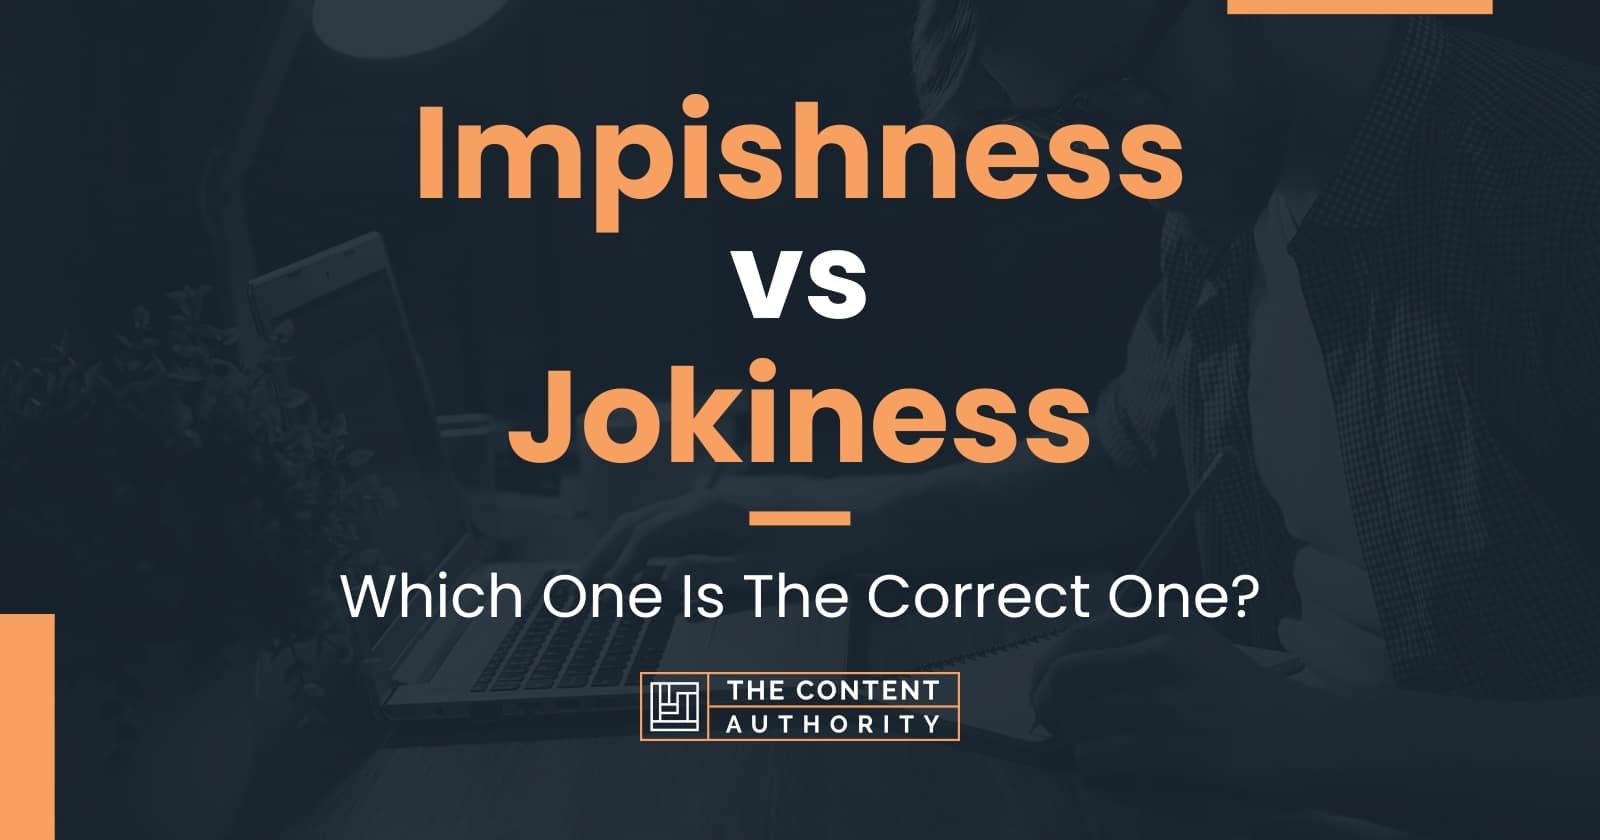 Impishness vs Jokiness Which One Is The Correct One?